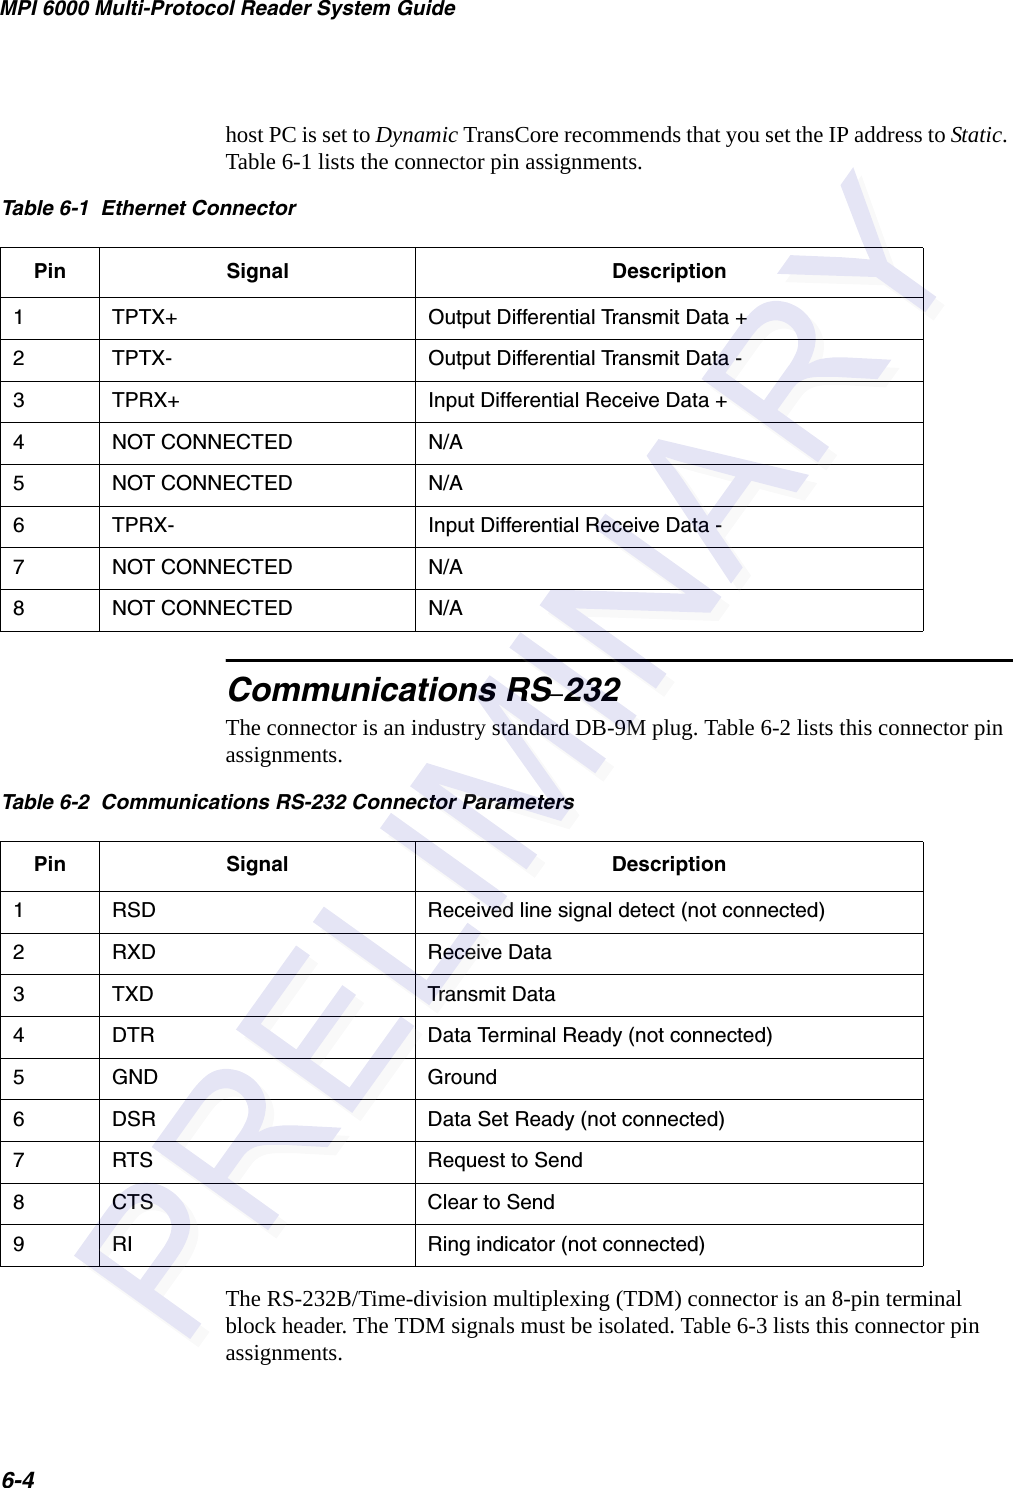 MPI 6000 Multi-Protocol Reader System Guide6-4host PC is set to Dynamic TransCore recommends that you set the IP address to Static. Table 6-1 lists the connector pin assignments.Communications RS–232The connector is an industry standard DB-9M plug. Table 6-2 lists this connector pin assignments.The RS-232B/Time-division multiplexing (TDM) connector is an 8-pin terminal block header. The TDM signals must be isolated. Table 6-3 lists this connector pin assignments.Table 6-1  Ethernet ConnectorPin Signal Description1TPTX+ Output Differential Transmit Data +2TPTX- Output Differential Transmit Data -3  TPRX+ Input Differential Receive Data +4NOT CONNECTED N/A5NOT CONNECTED N/A6TPRX- Input Differential Receive Data -7NOT CONNECTED N/A8NOT CONNECTED N/ATable 6-2  Communications RS-232 Connector ParametersPin Signal Description1RSD Received line signal detect (not connected)2RXD Receive Data3TXD Transmit Data4DTR Data Terminal Ready (not connected)5GND Ground6DSR Data Set Ready (not connected)7RTS Request to Send8CTS Clear to Send9RI Ring indicator (not connected)